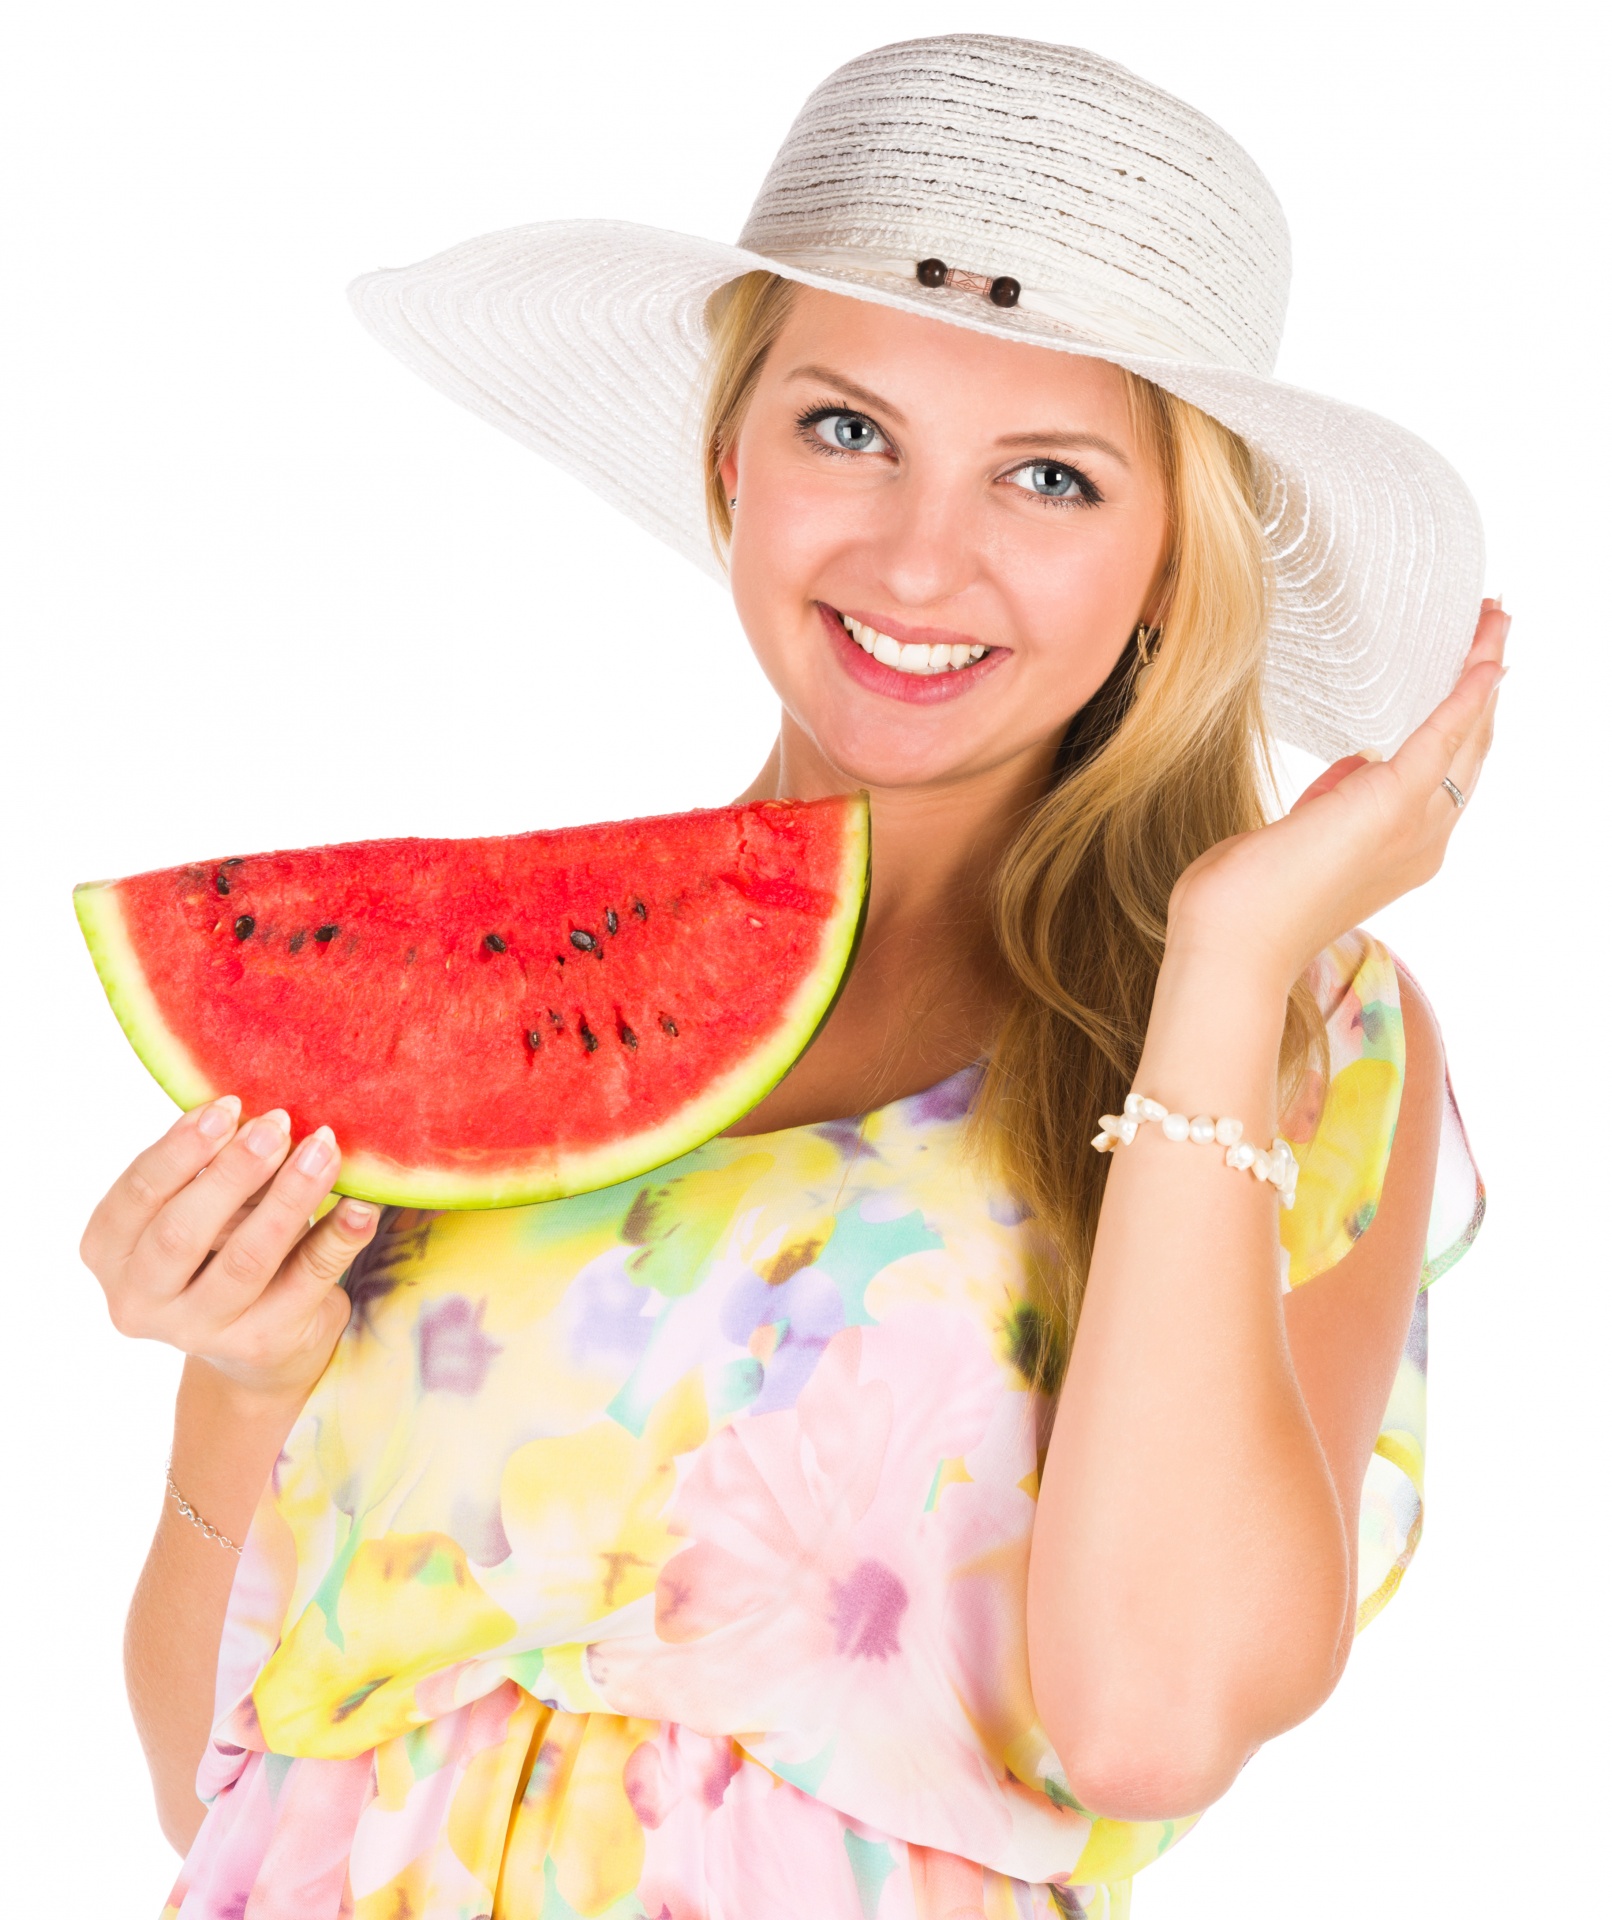 Young woman holding a slice of a watermelon in summer outfit